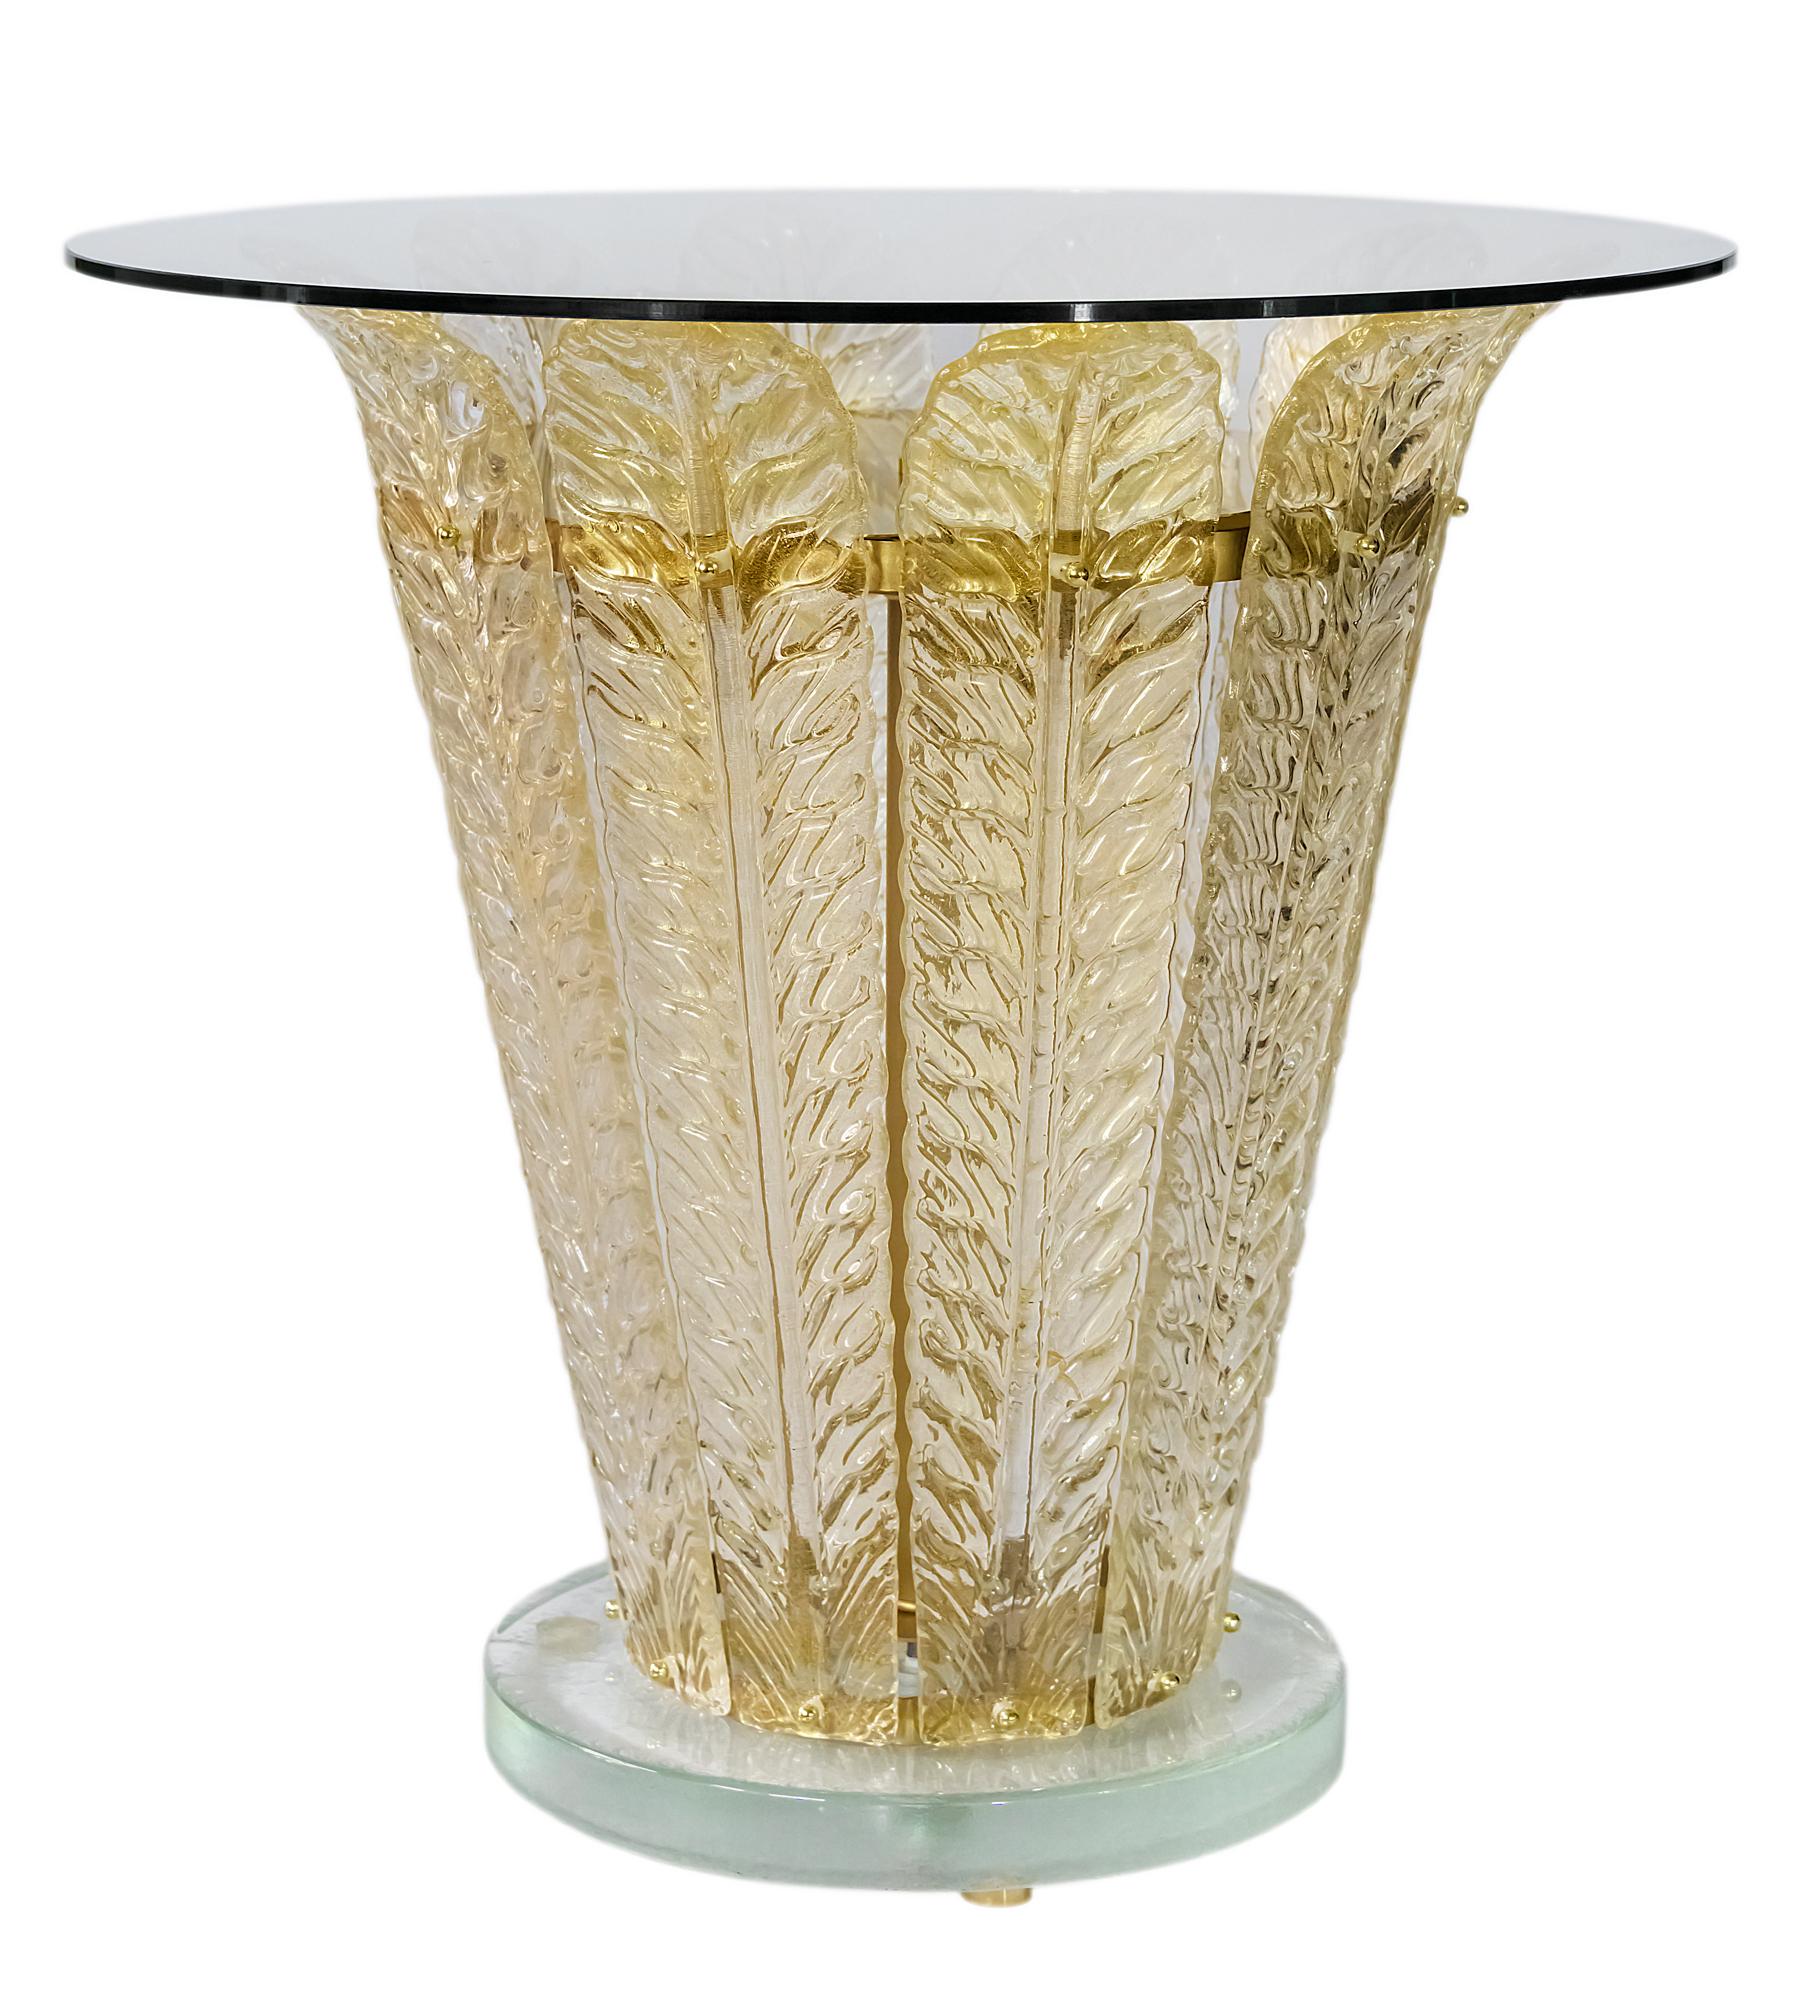 Hand-Crafted Illuminated Italian Side Table with Murano Glass Leaf Decor For Sale